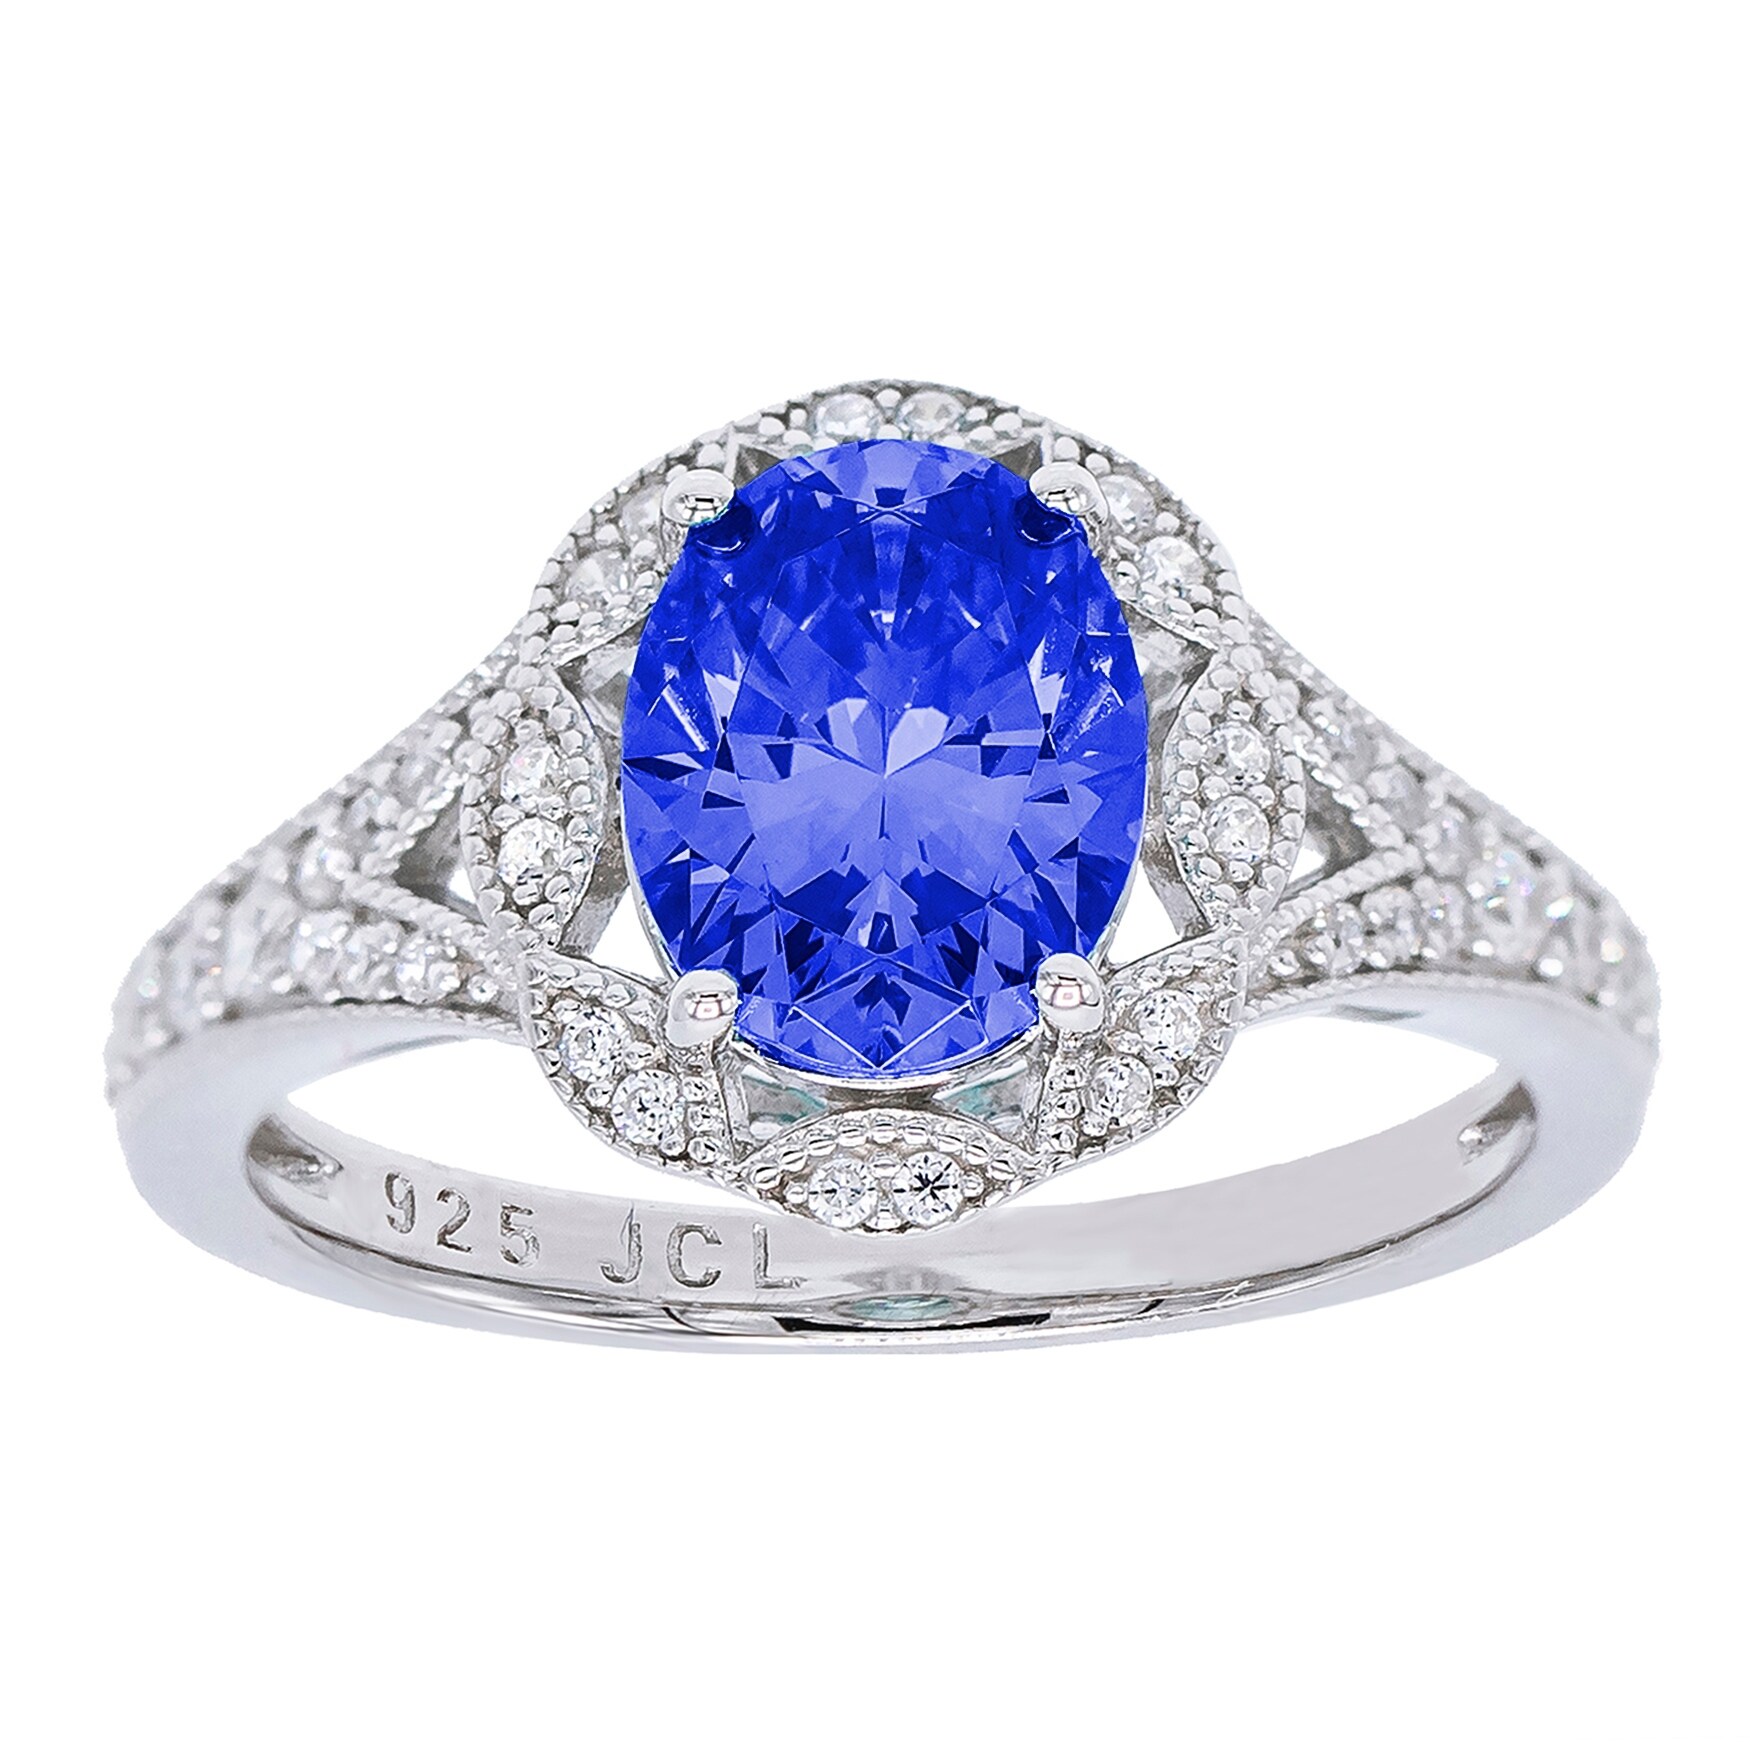 Simulated Sapphire Square Cubic Zirconia Antique Ring Rhodium Plated Sterling Silver